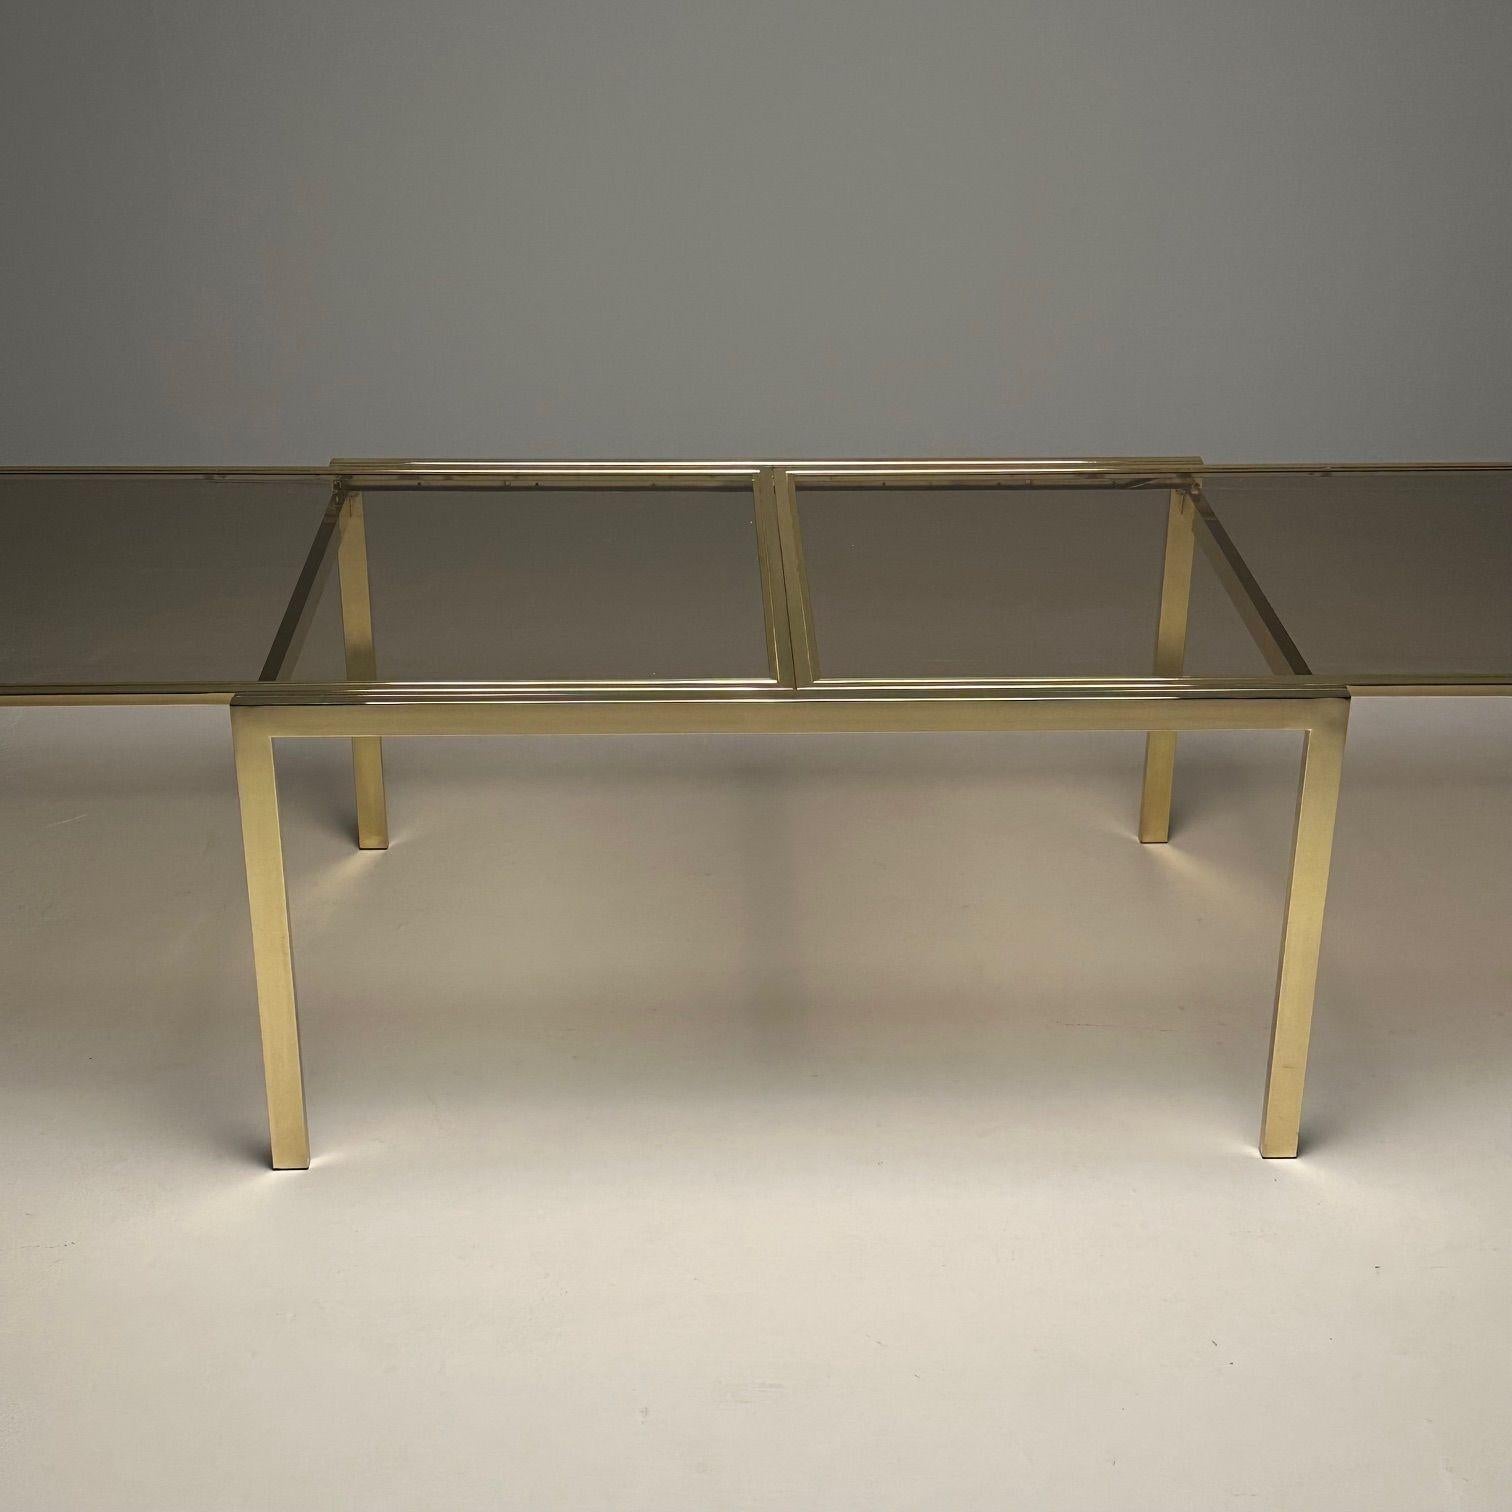 Milo Baughman, DIA, Mid-Century Modern Dining Table, Smoked Glass, Brass, Canada For Sale 7